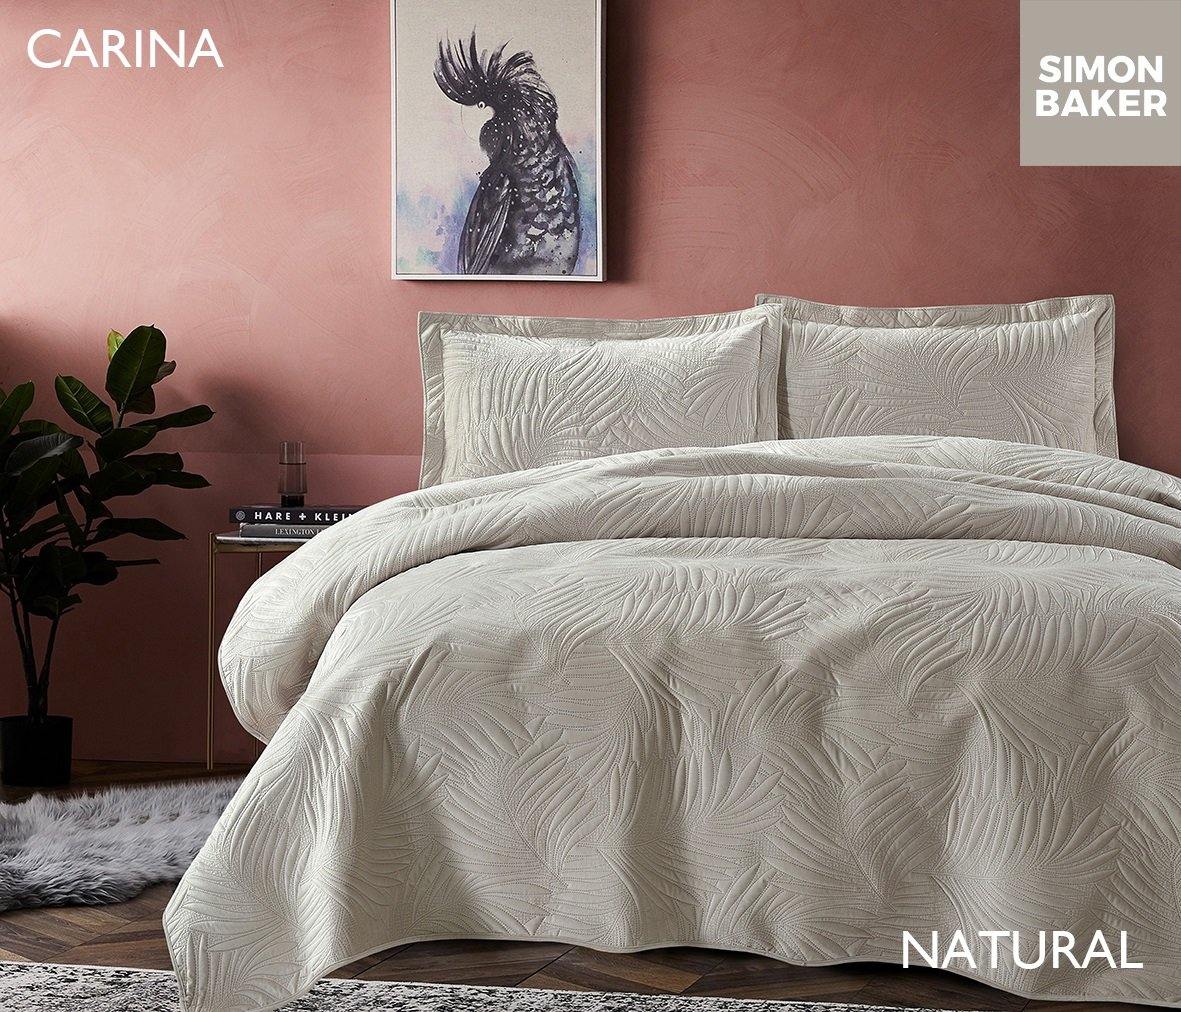 Simon Baker | Carina Quilted Bedspread Natural (Various Sizes)